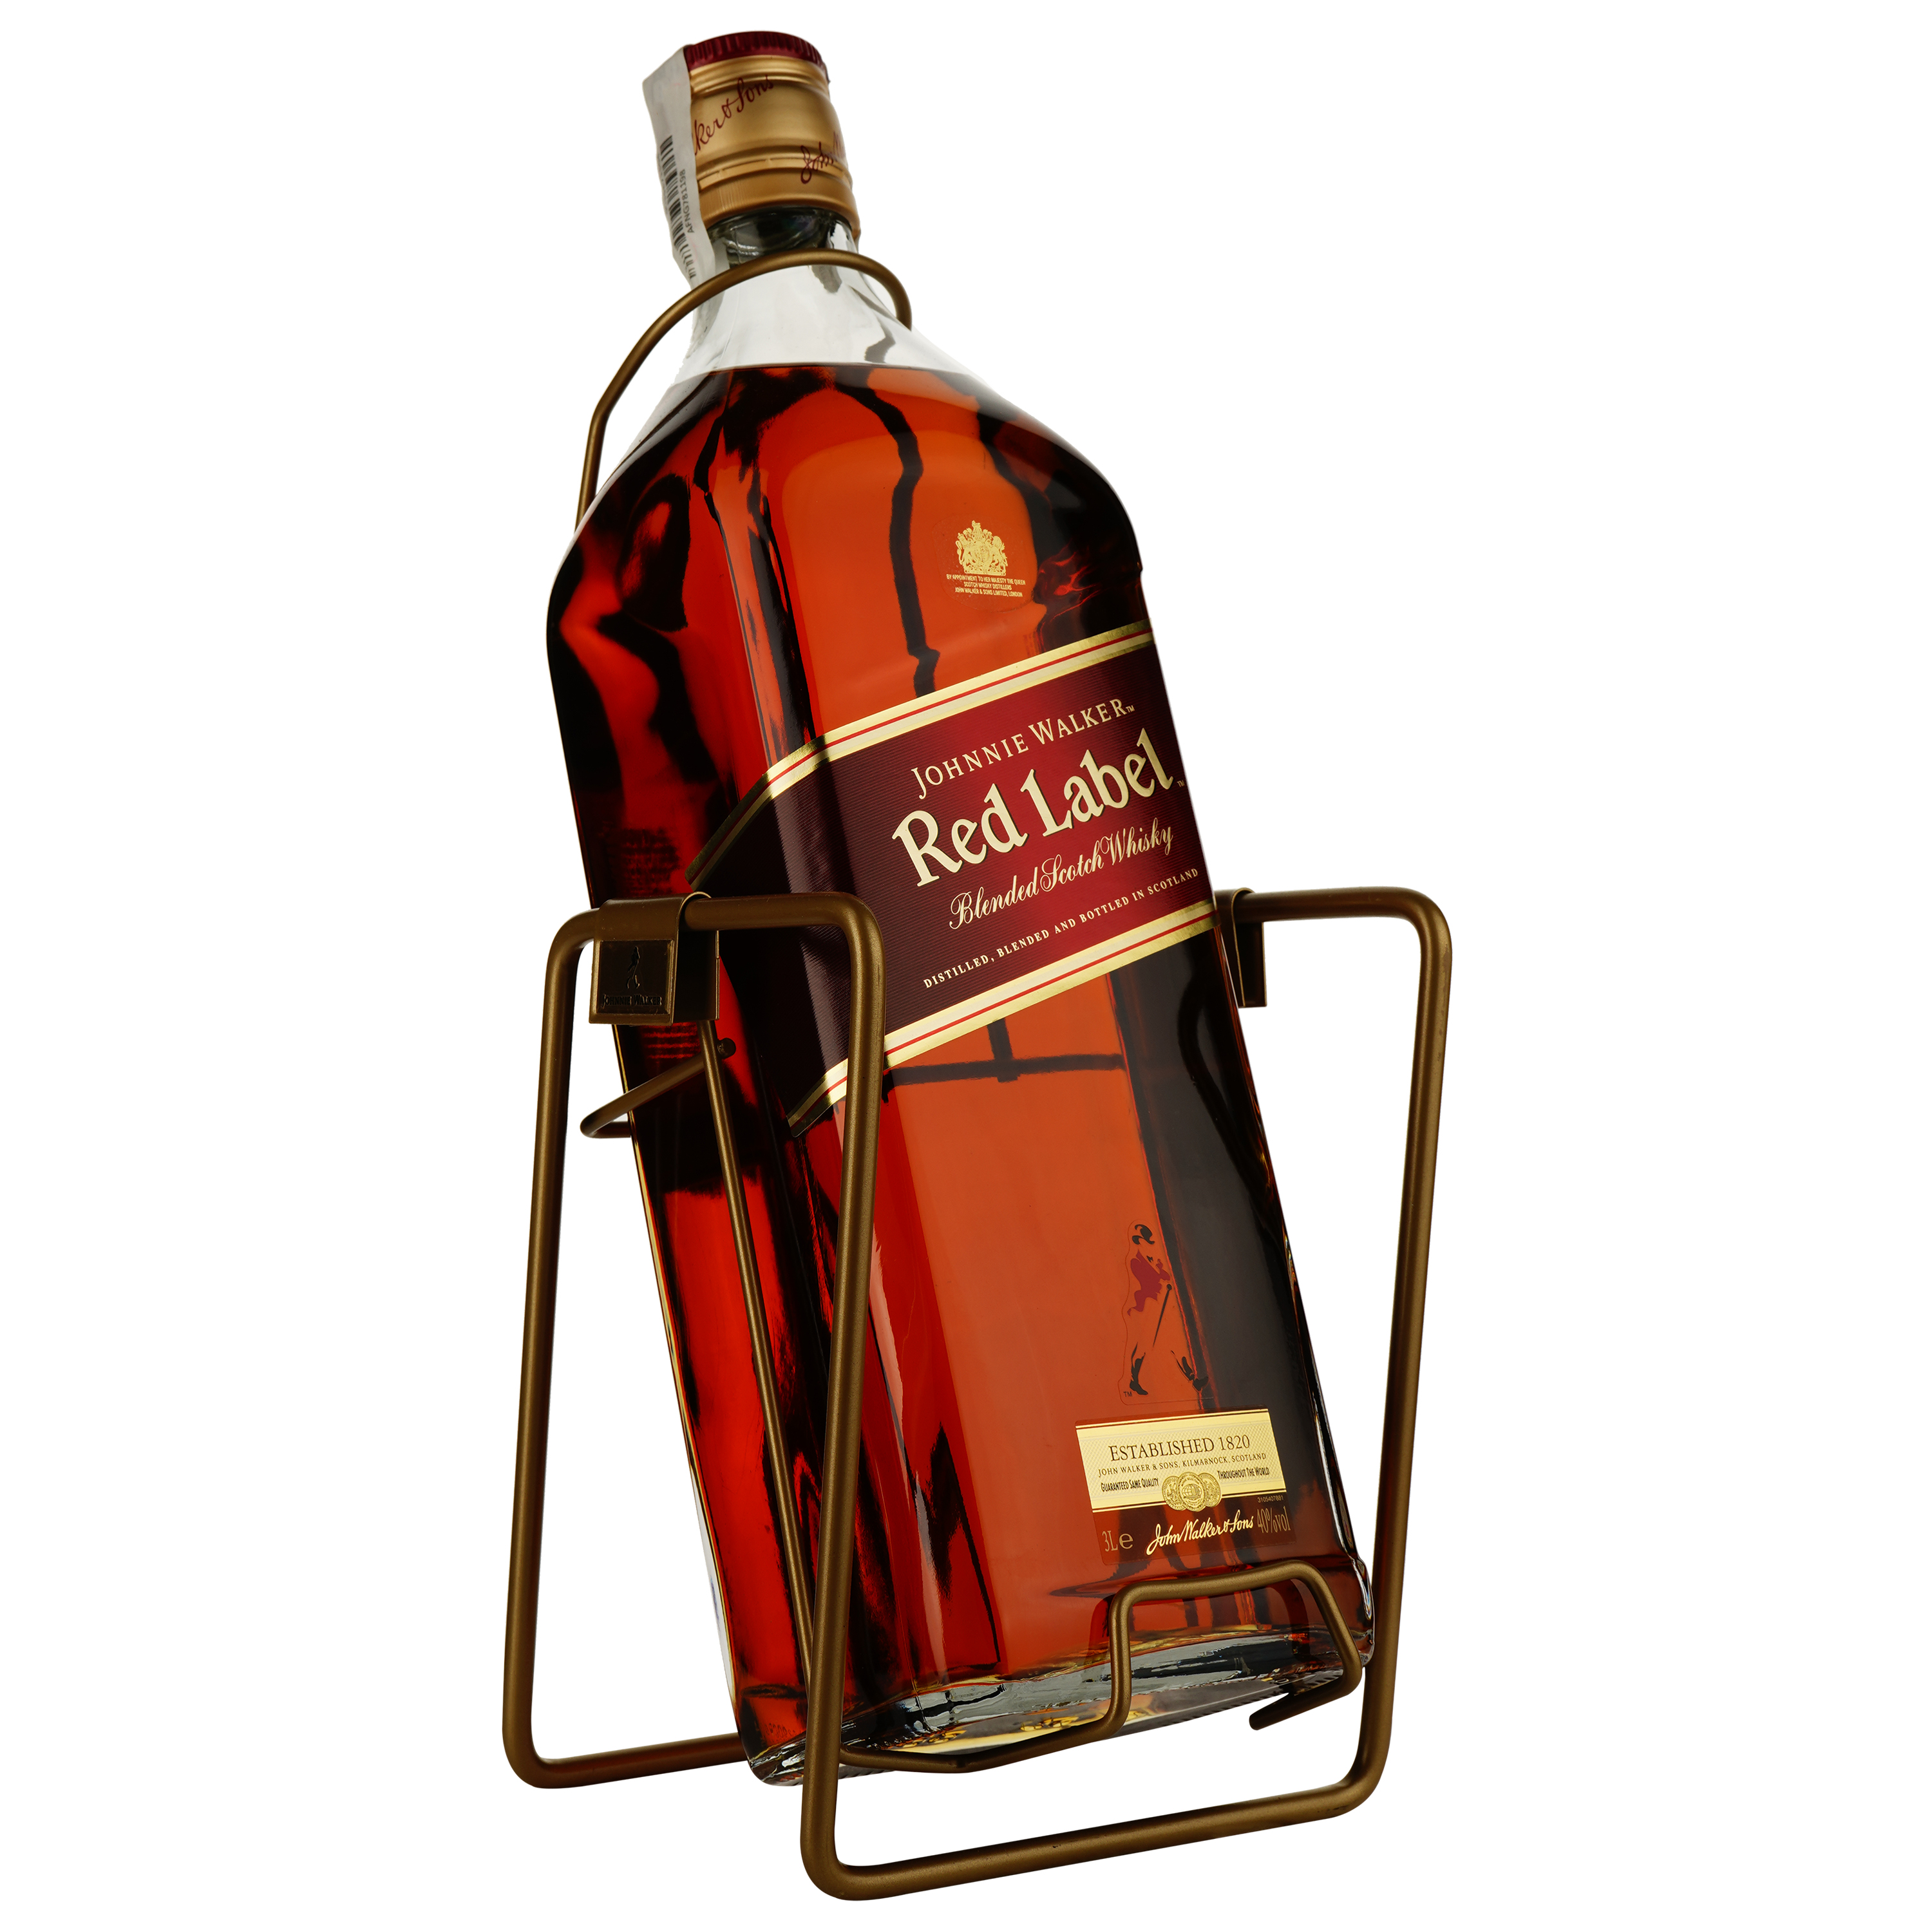 Виски Johnnie Walker Red label Blended Scotch Whisky, 3 л, 40% (676594) - фото 1